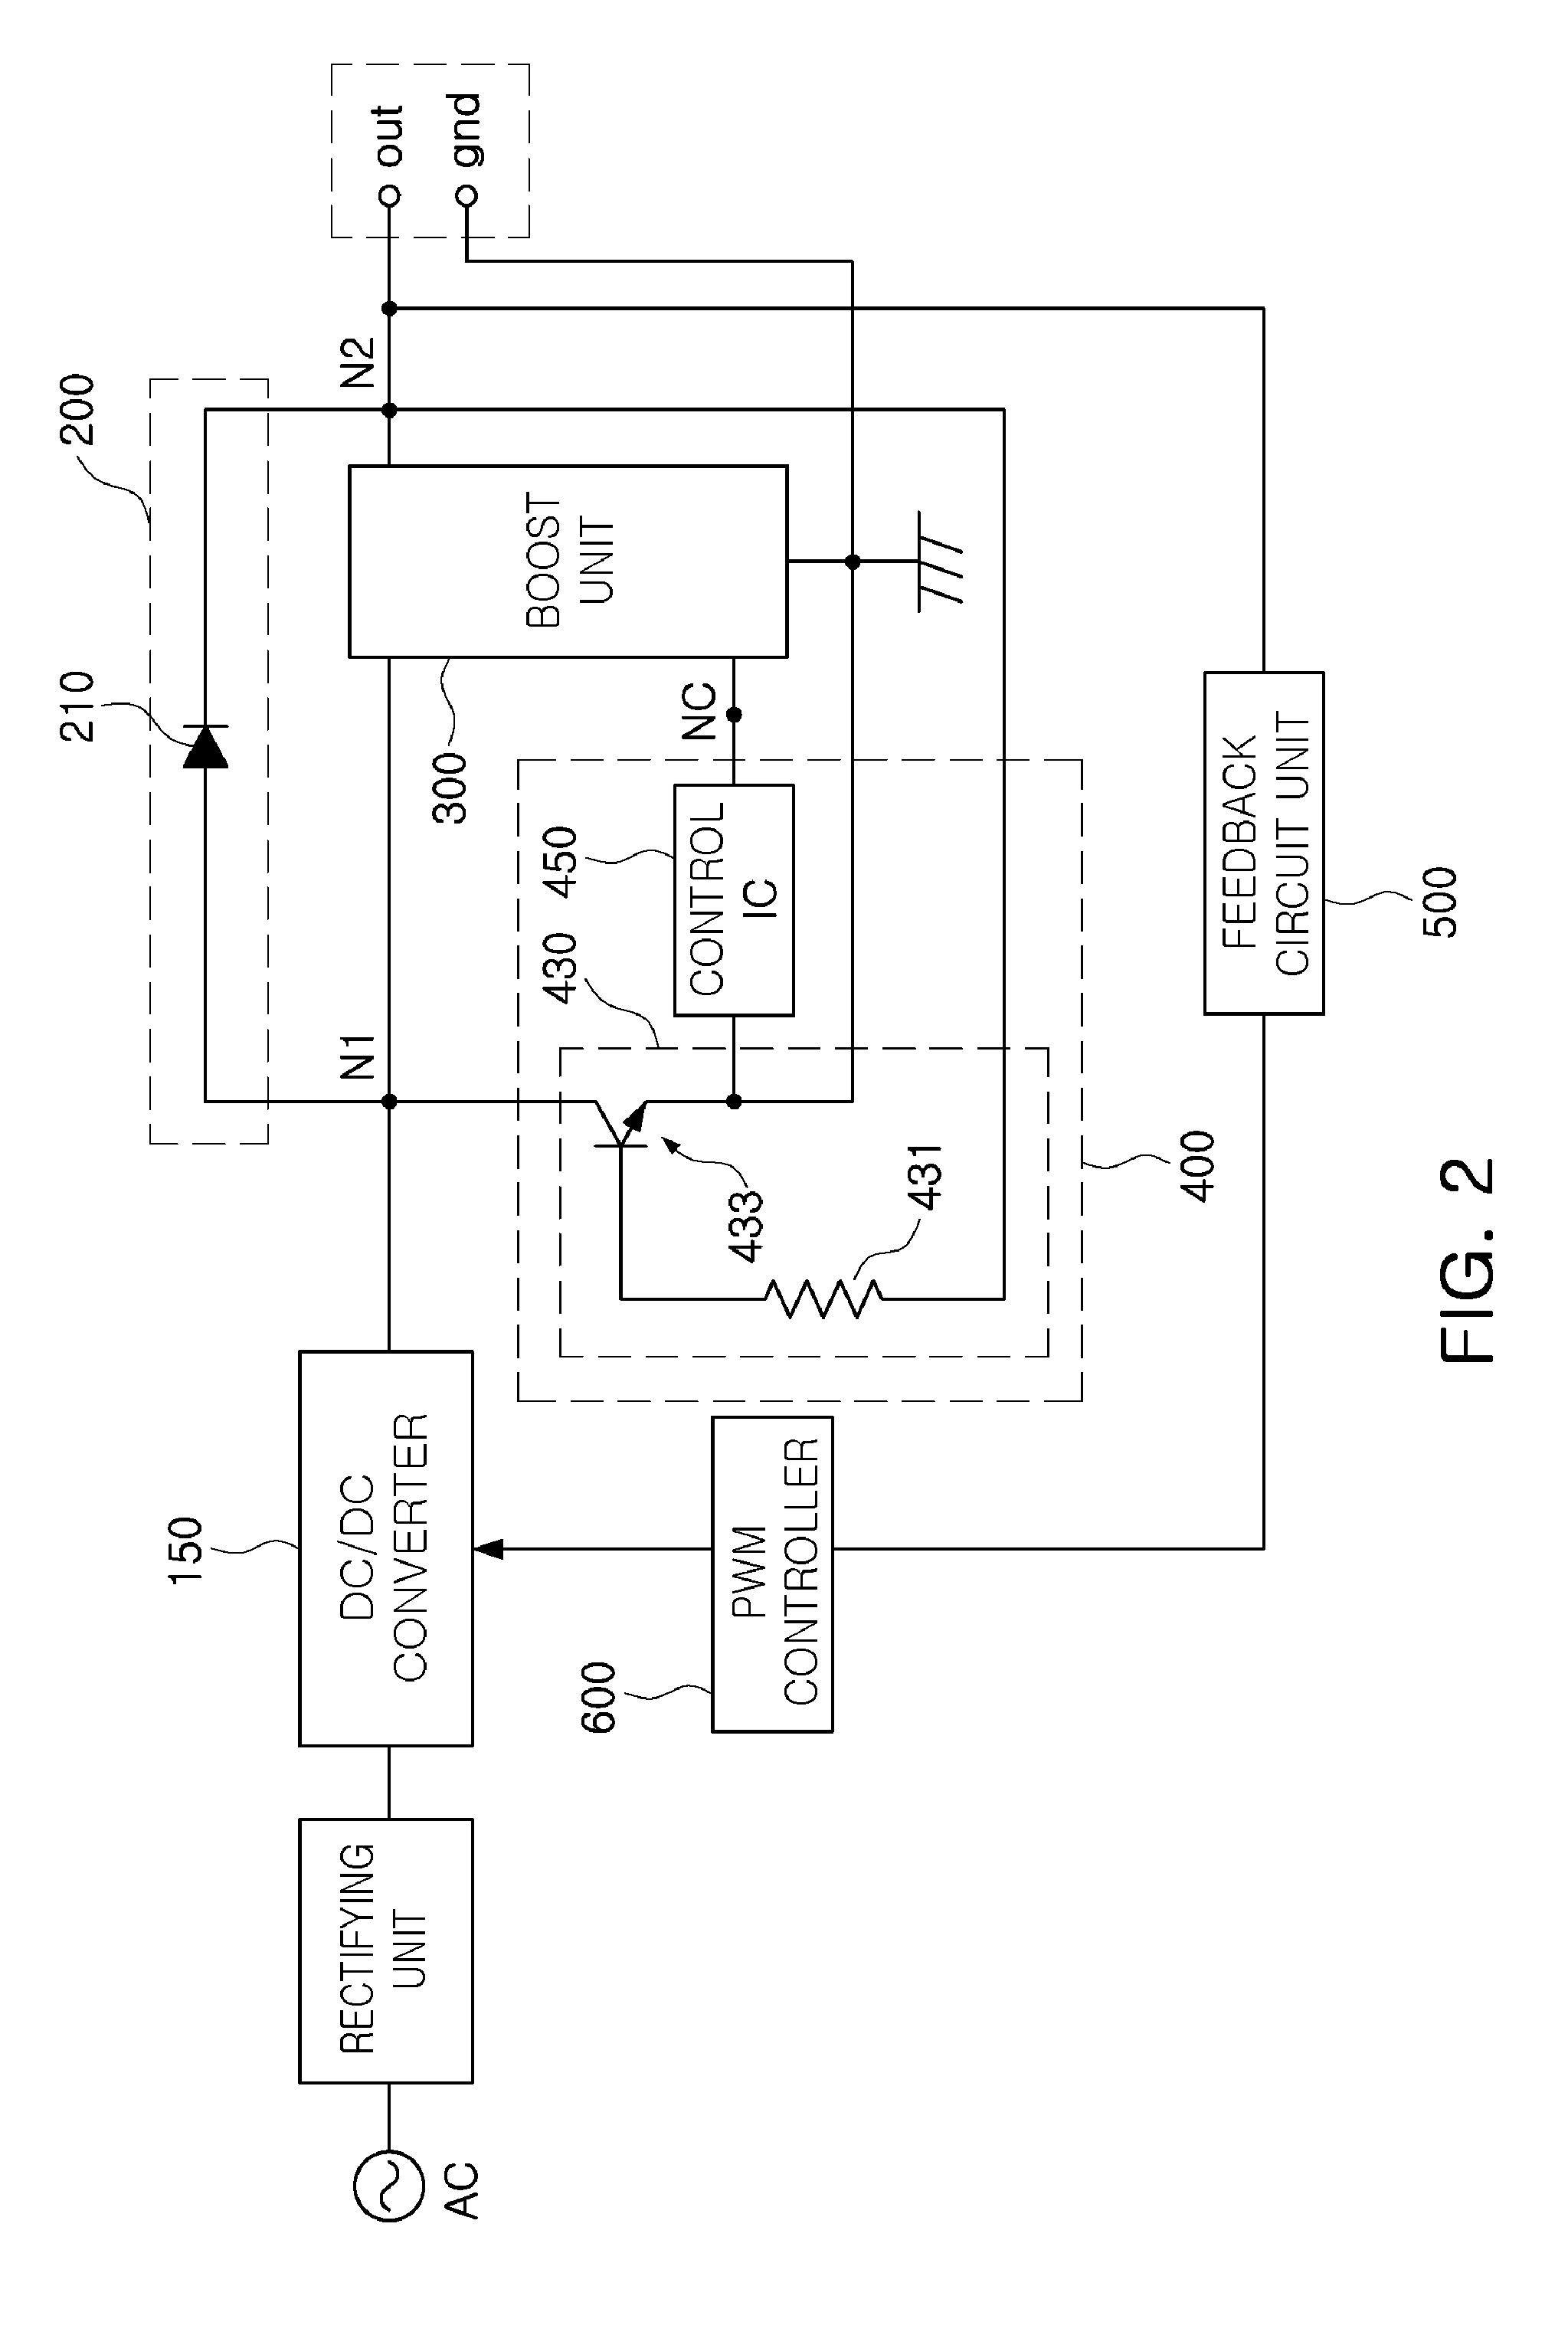 Switching mode power supply having multiple output